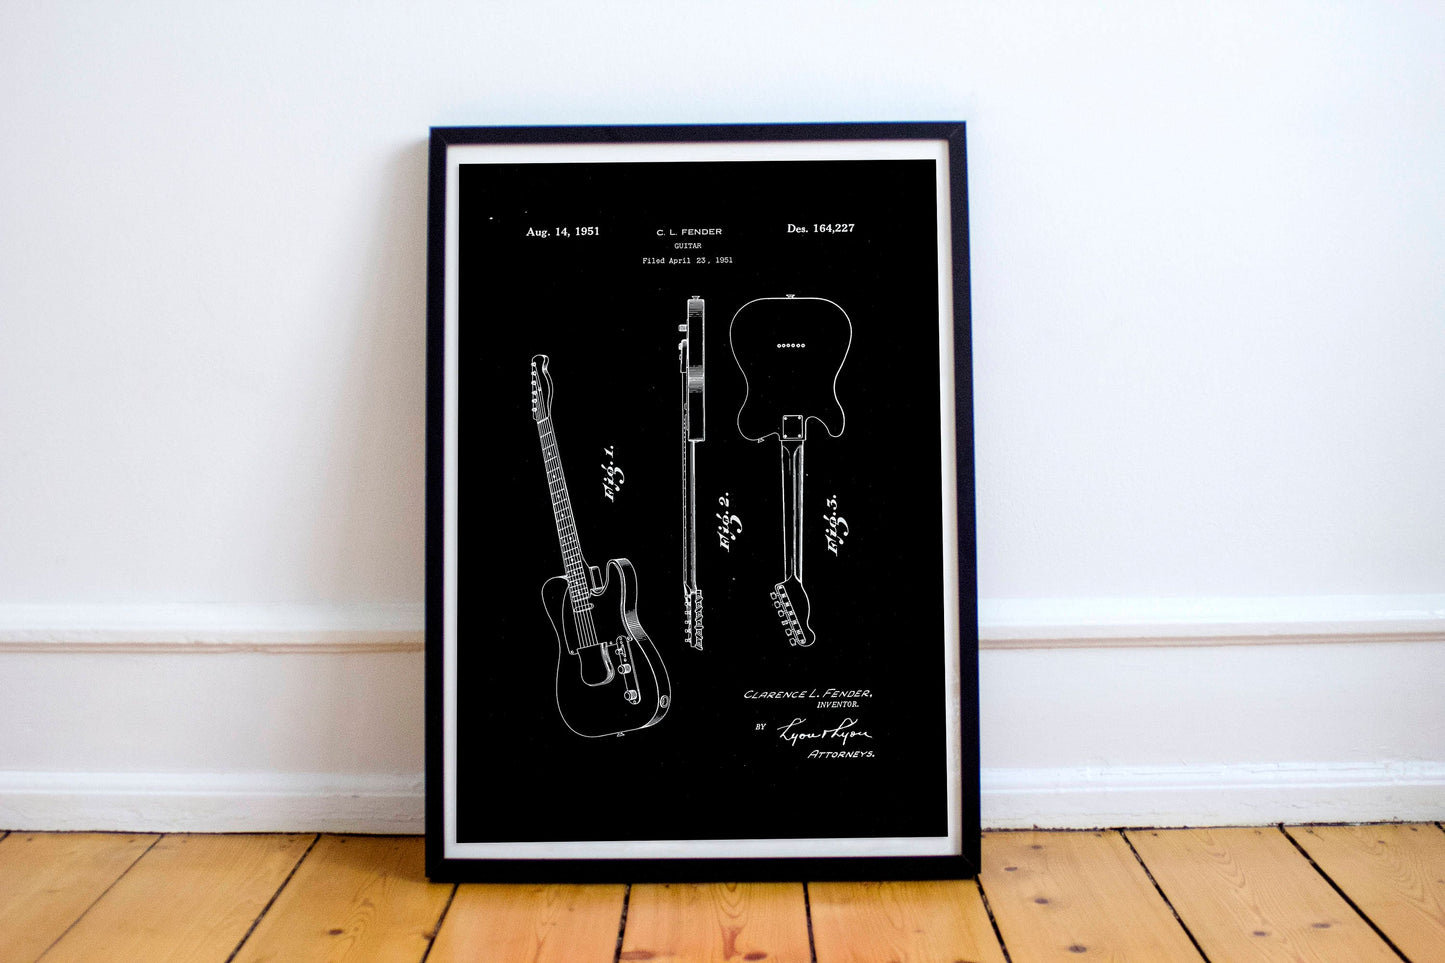 Telecaster Electric Guitar Patent Wall Art Print, Patent Art, Blueprint, Patent Print, Patent Poster, gift for dad